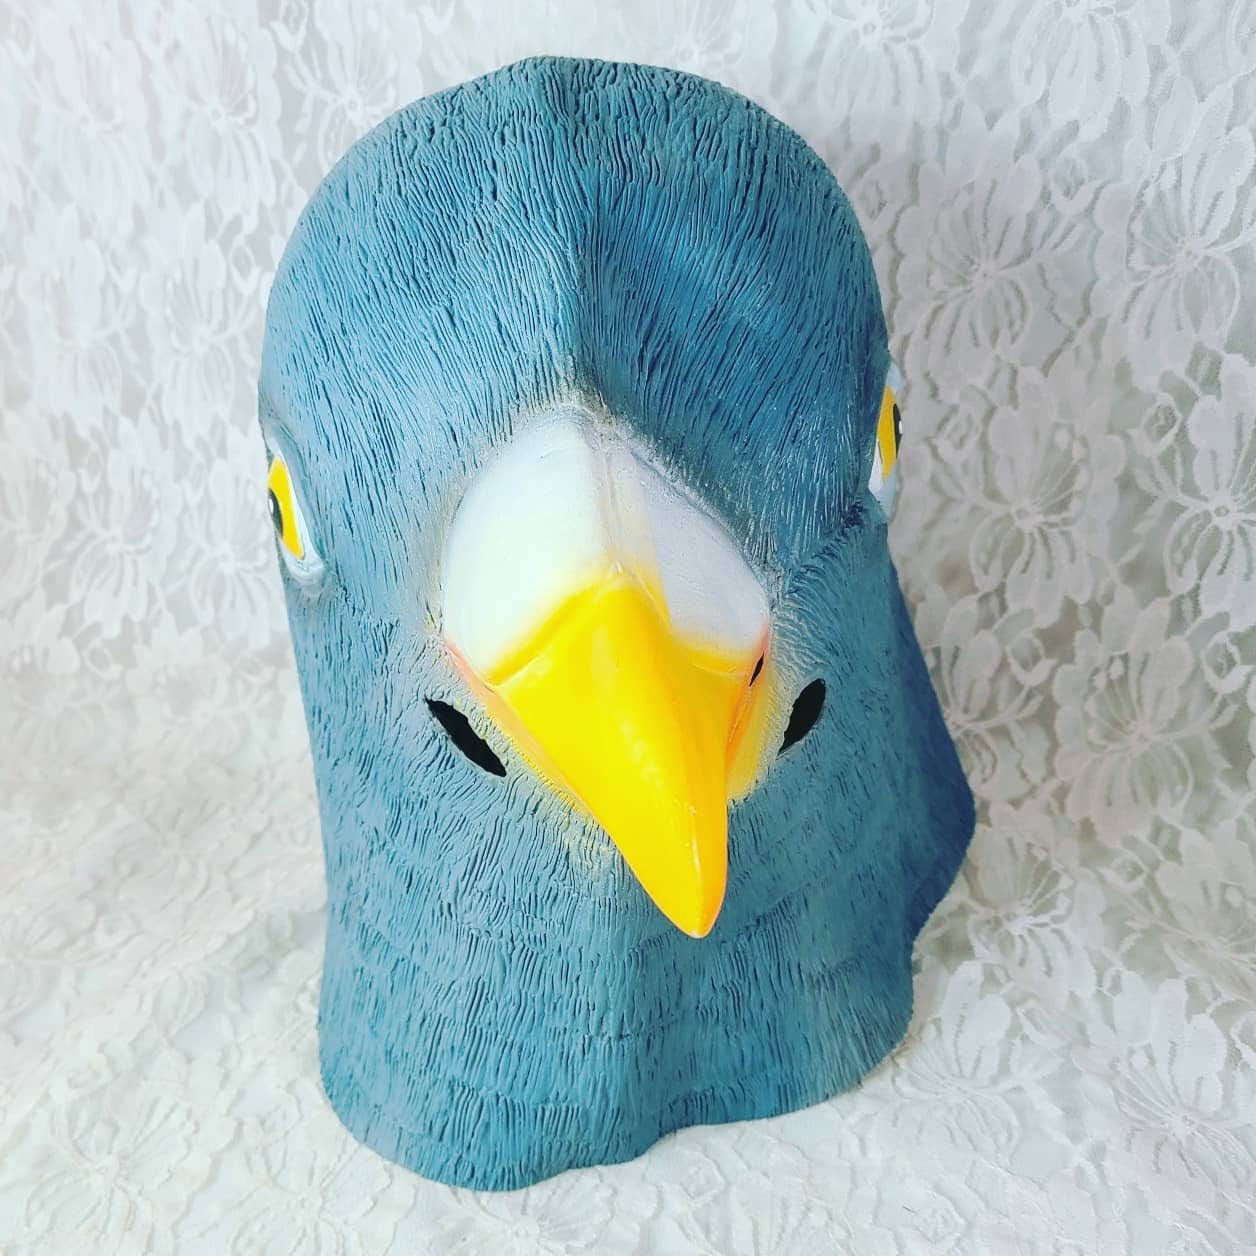 Blue Bird Head Mask Adult Full Head Cover ~ Be a GIANT BIRD ~ Vinyl ~ Theatrical Theater Mask ~ Cosplay RPG Masquerade Halloween